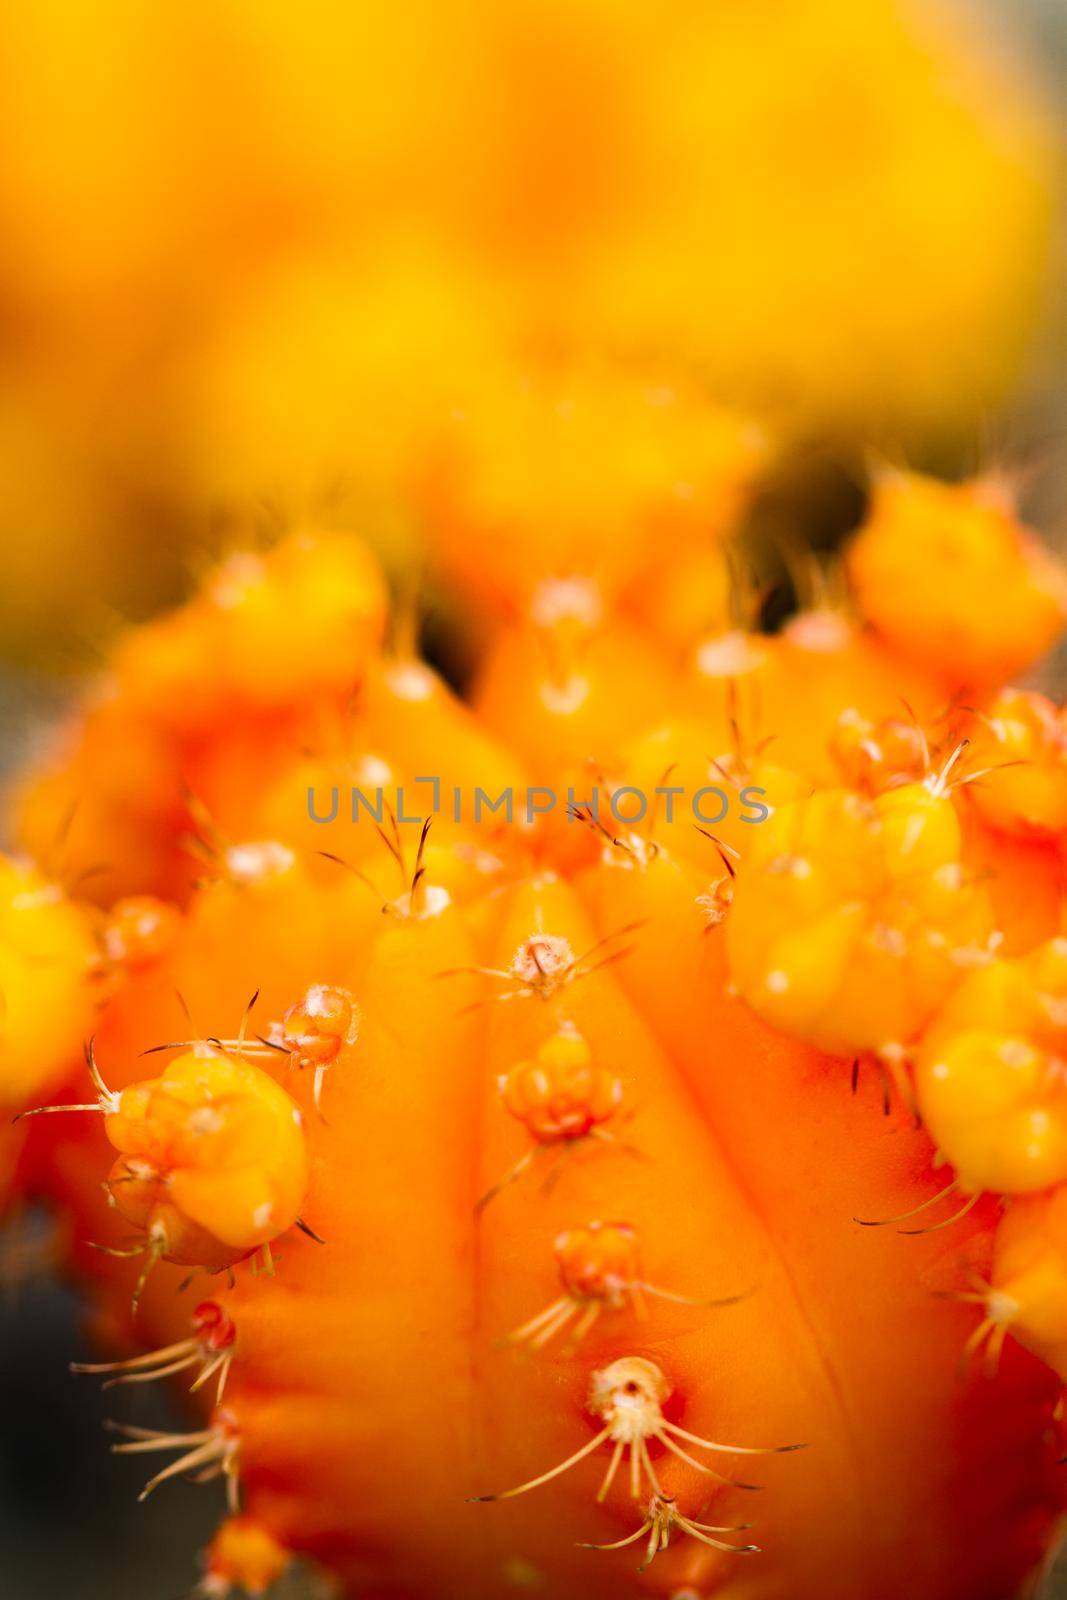 Close up of a small cactus. Most cacti live in habitats subject to at least some drought.